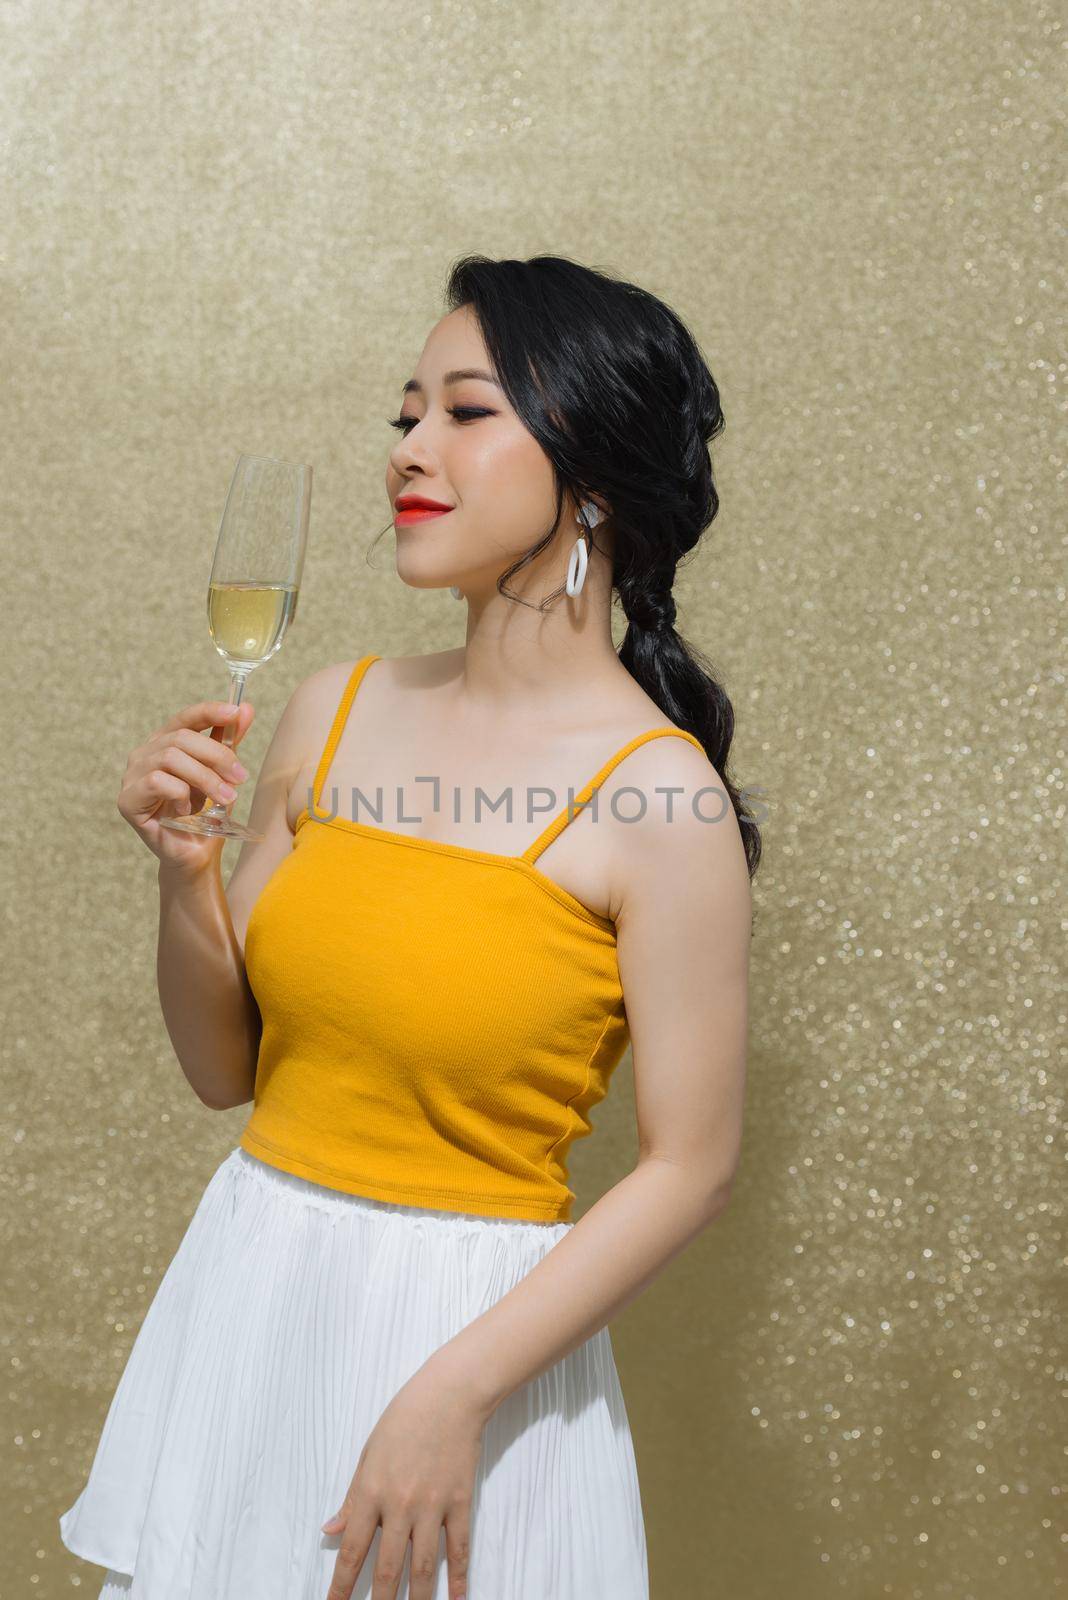 party, drinks, holidays, luxury and celebration concept - smiling woman in evening dress with glass of sparkling wine over gold background. by makidotvn